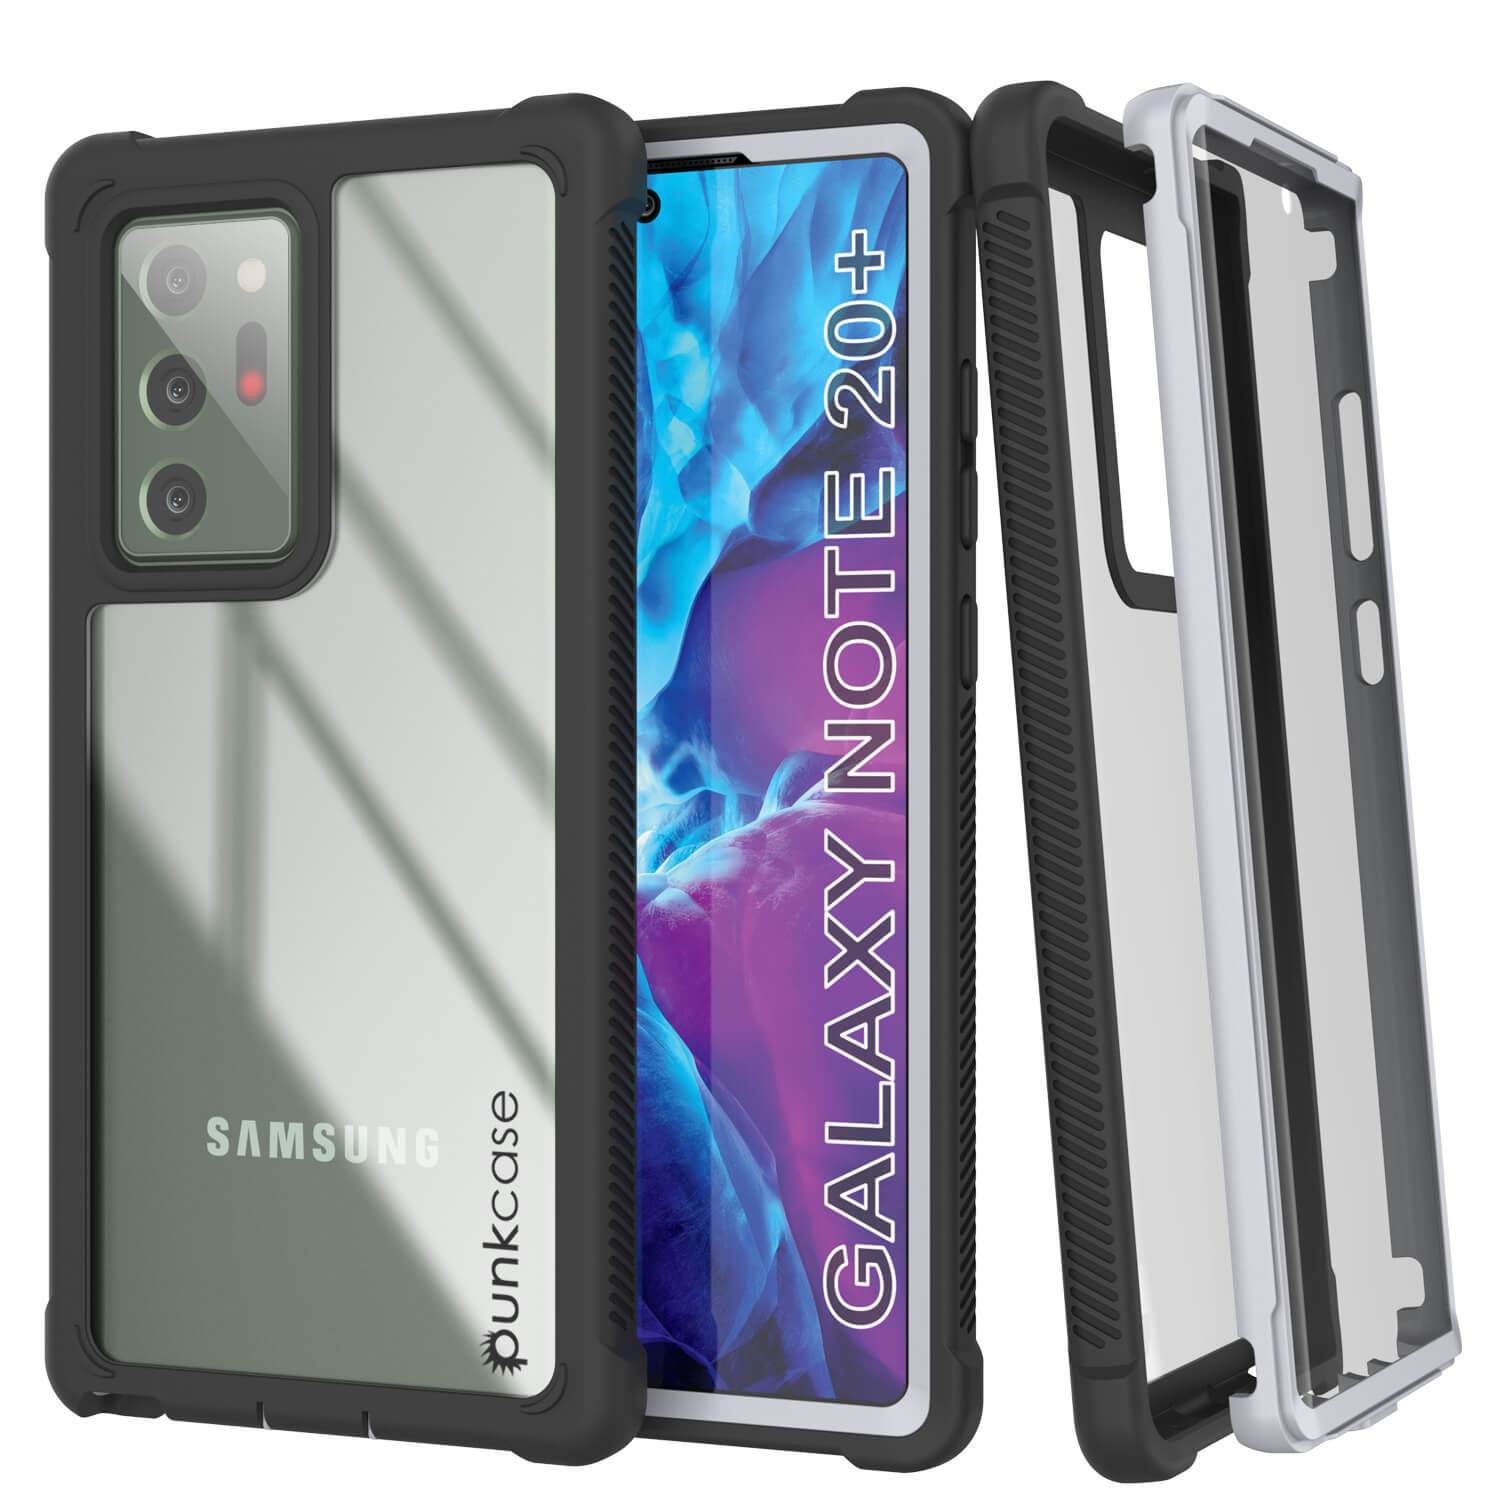 Punkcase Galaxy Note 20 Ultra Case, [Spartan Series] White Rugged Heavy Duty Cover W/Built in Screen Protector